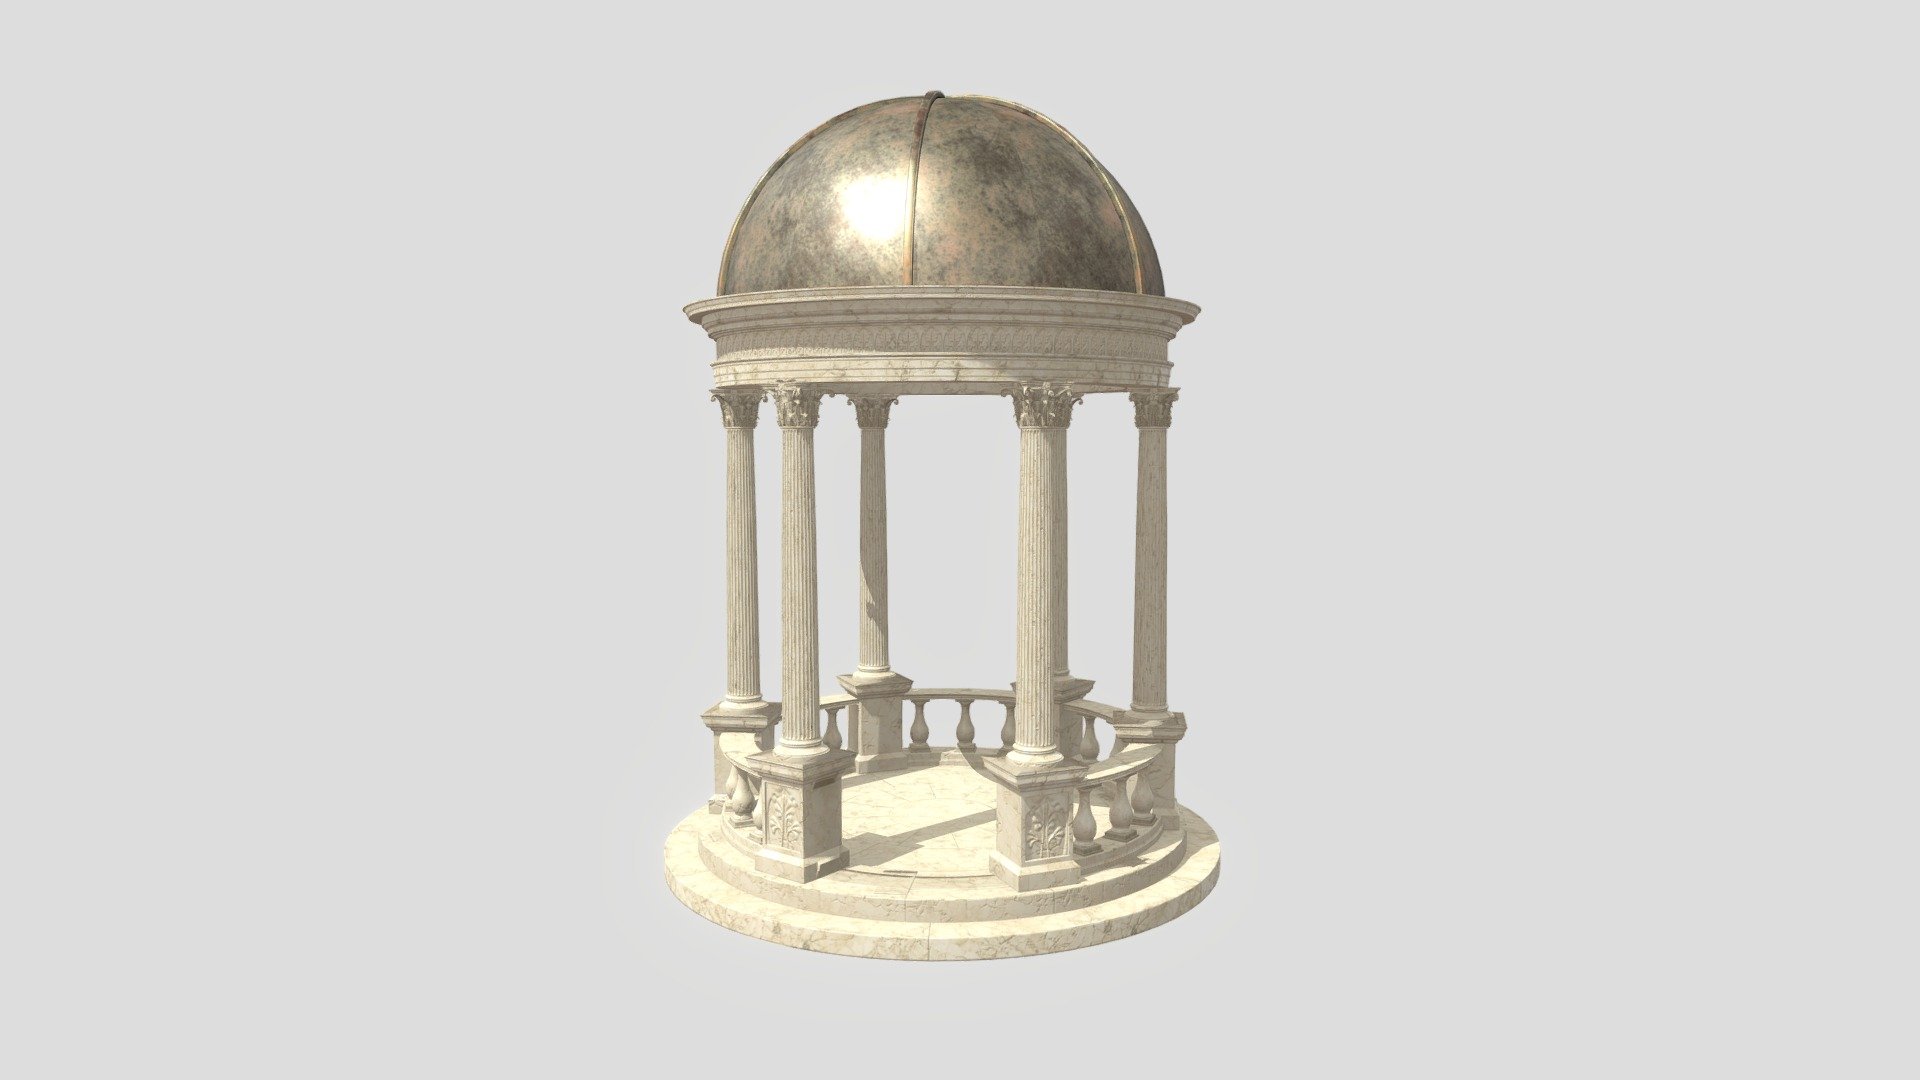 Greek gazebo made as a term paper in the subject of 3D graphics. 
Each element was made by hand in a blender as individual modules, and then exported to Substance Painter for texturing 3d model